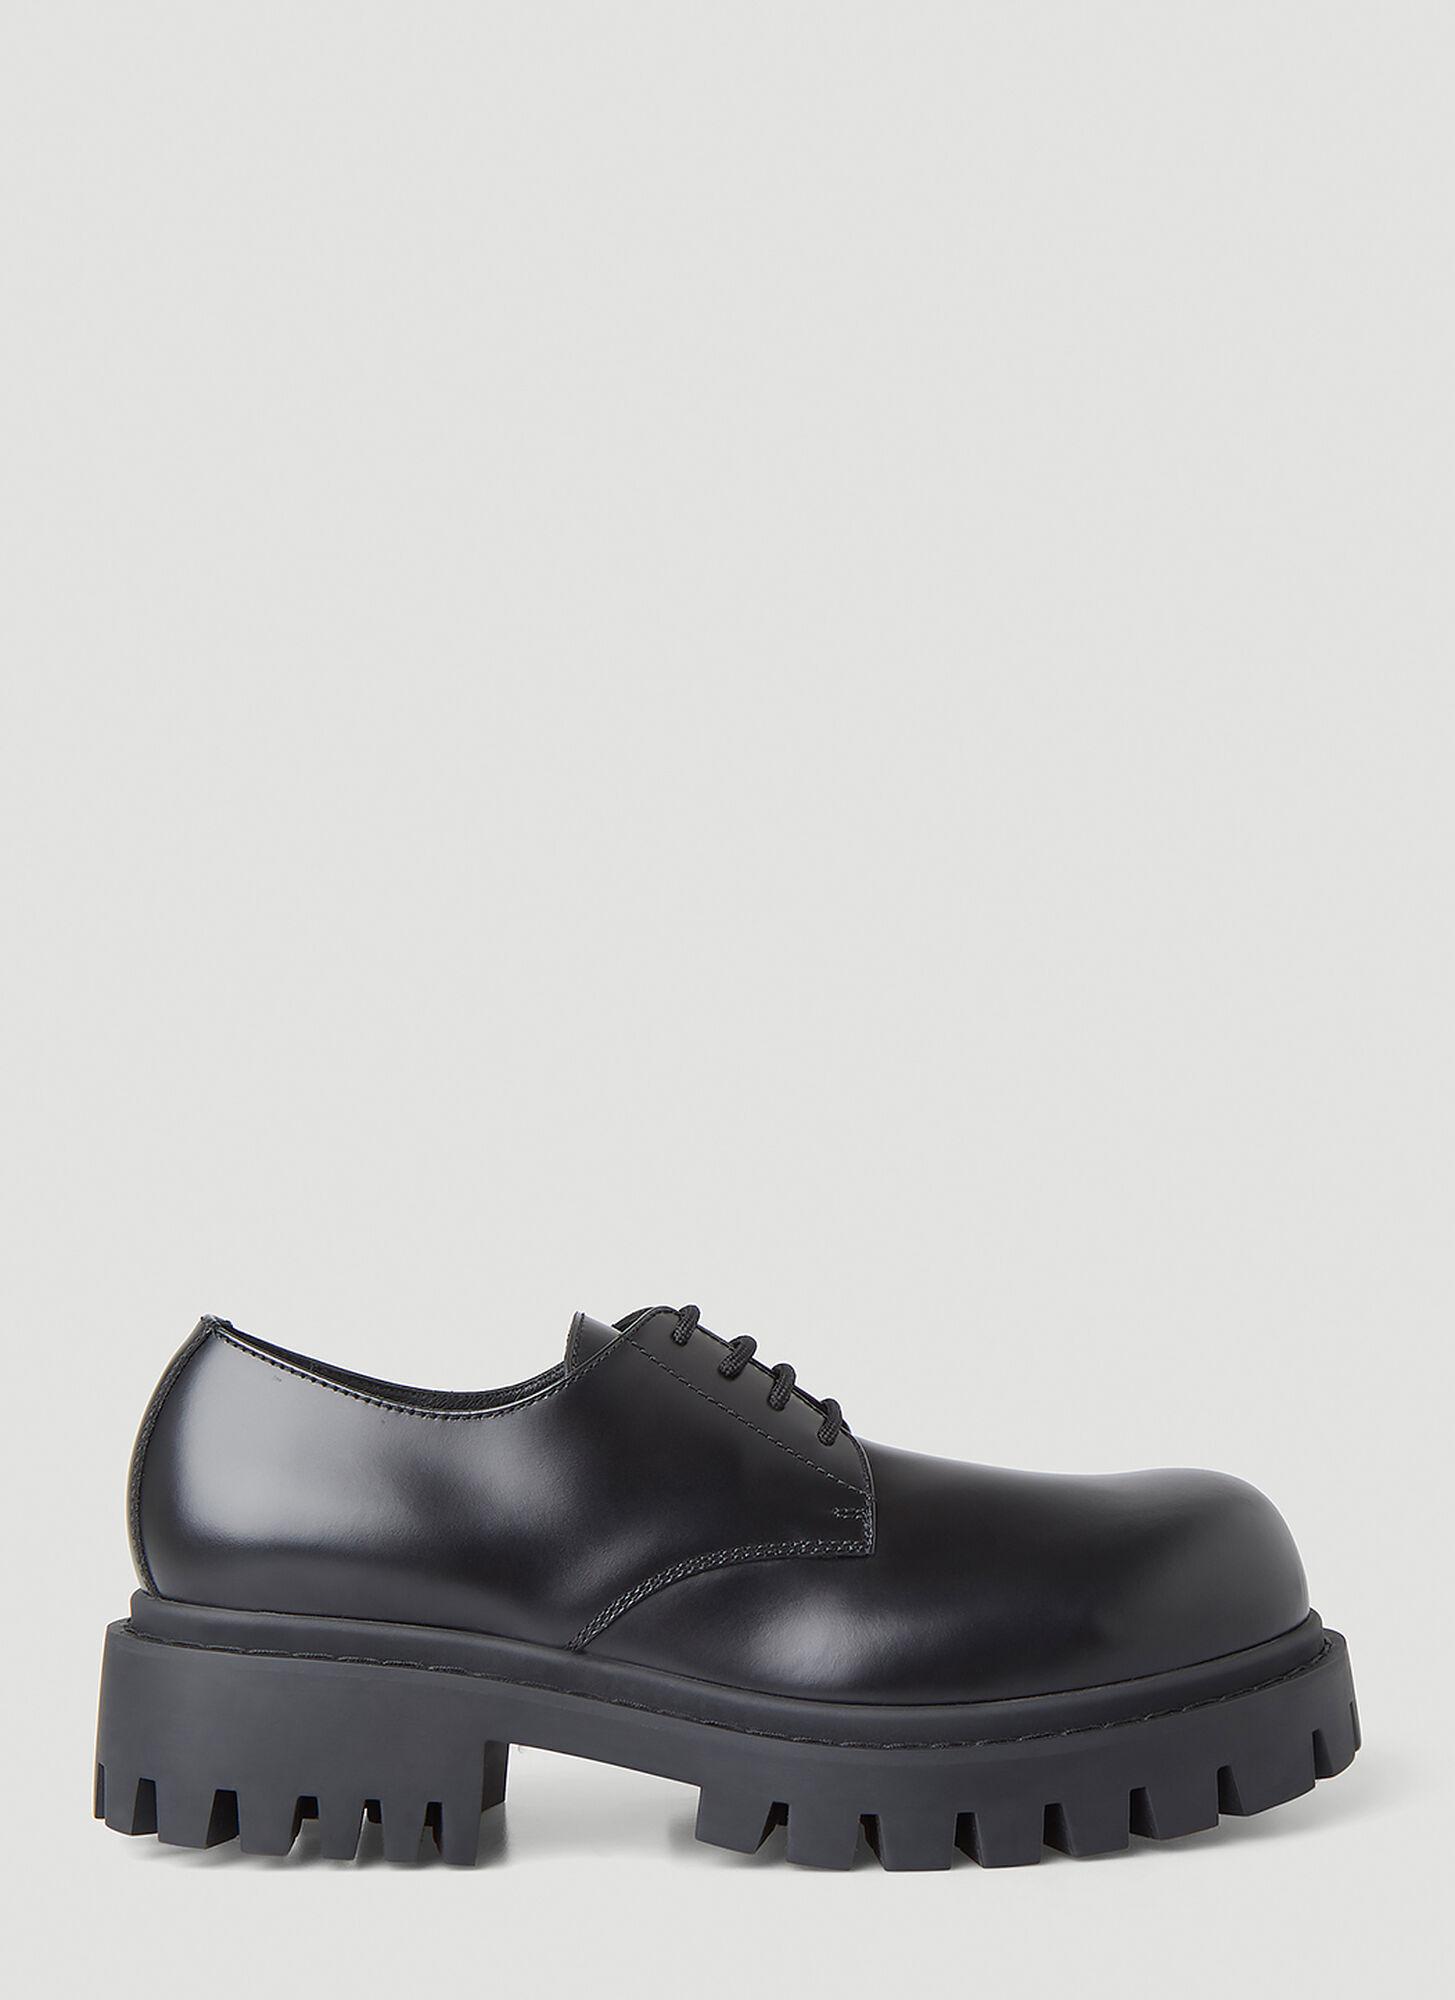 Balenciaga Sergeant Derby Shoes in Gray for Men | Lyst